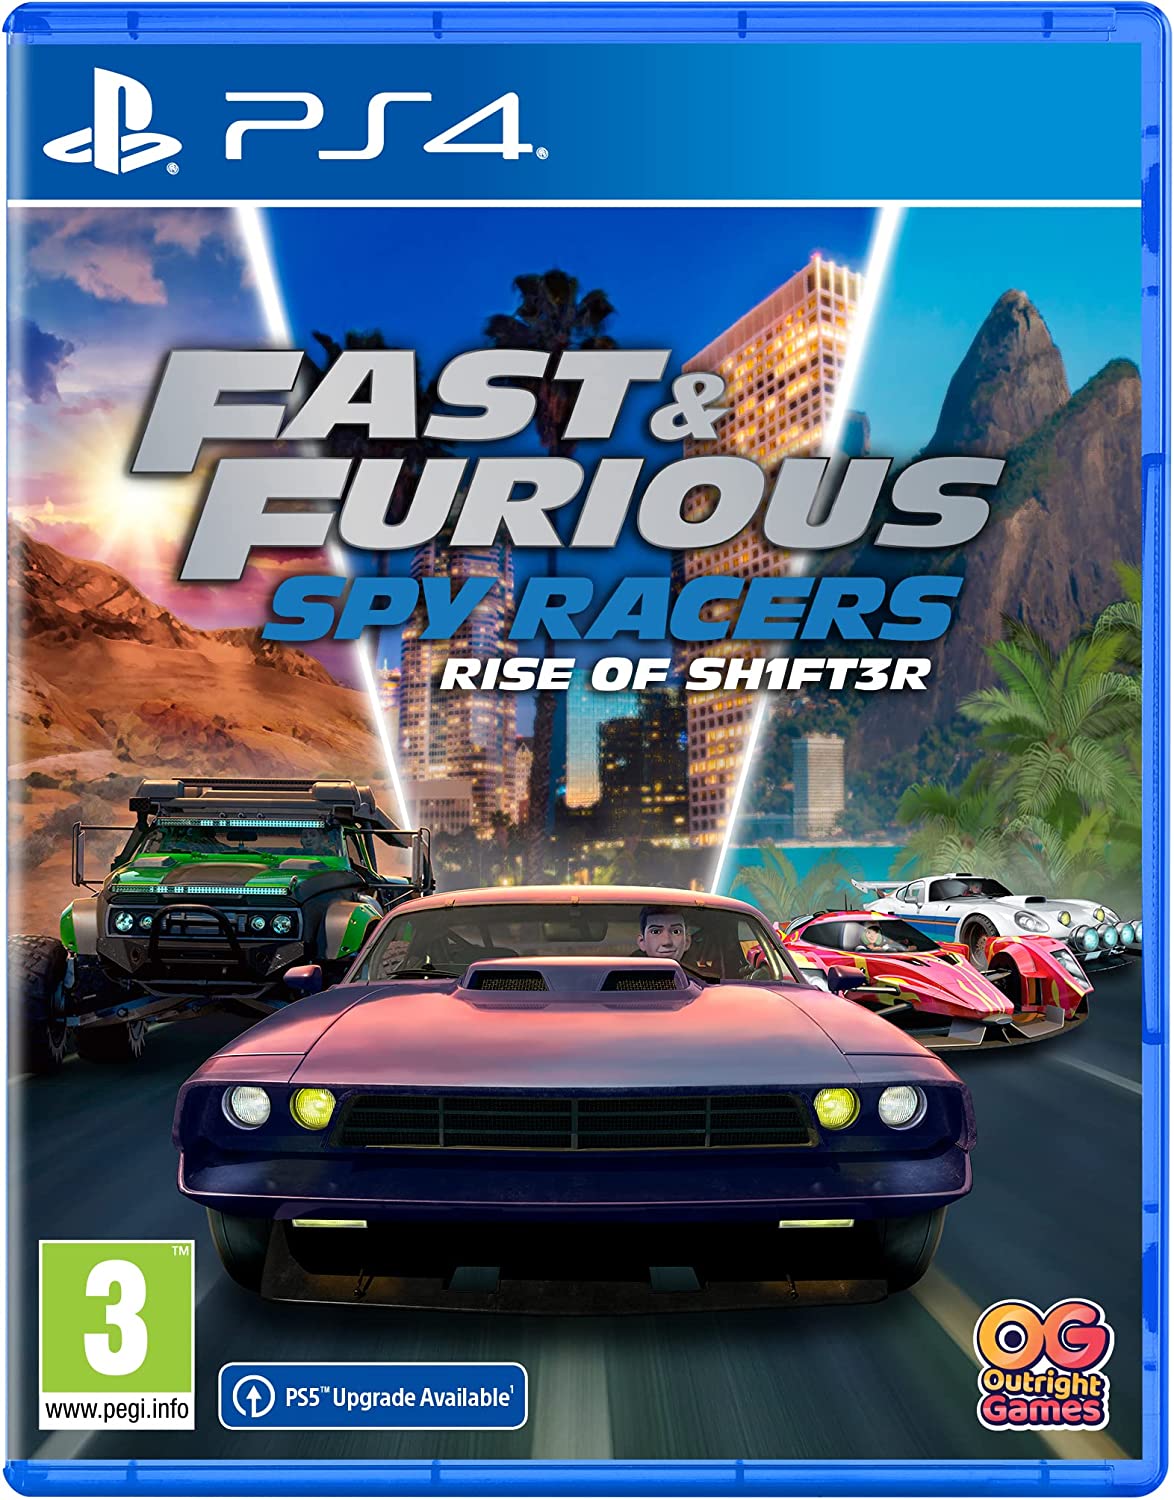 [PS4] Fast & Furious: Spy Racers Rise of SH1FT3R